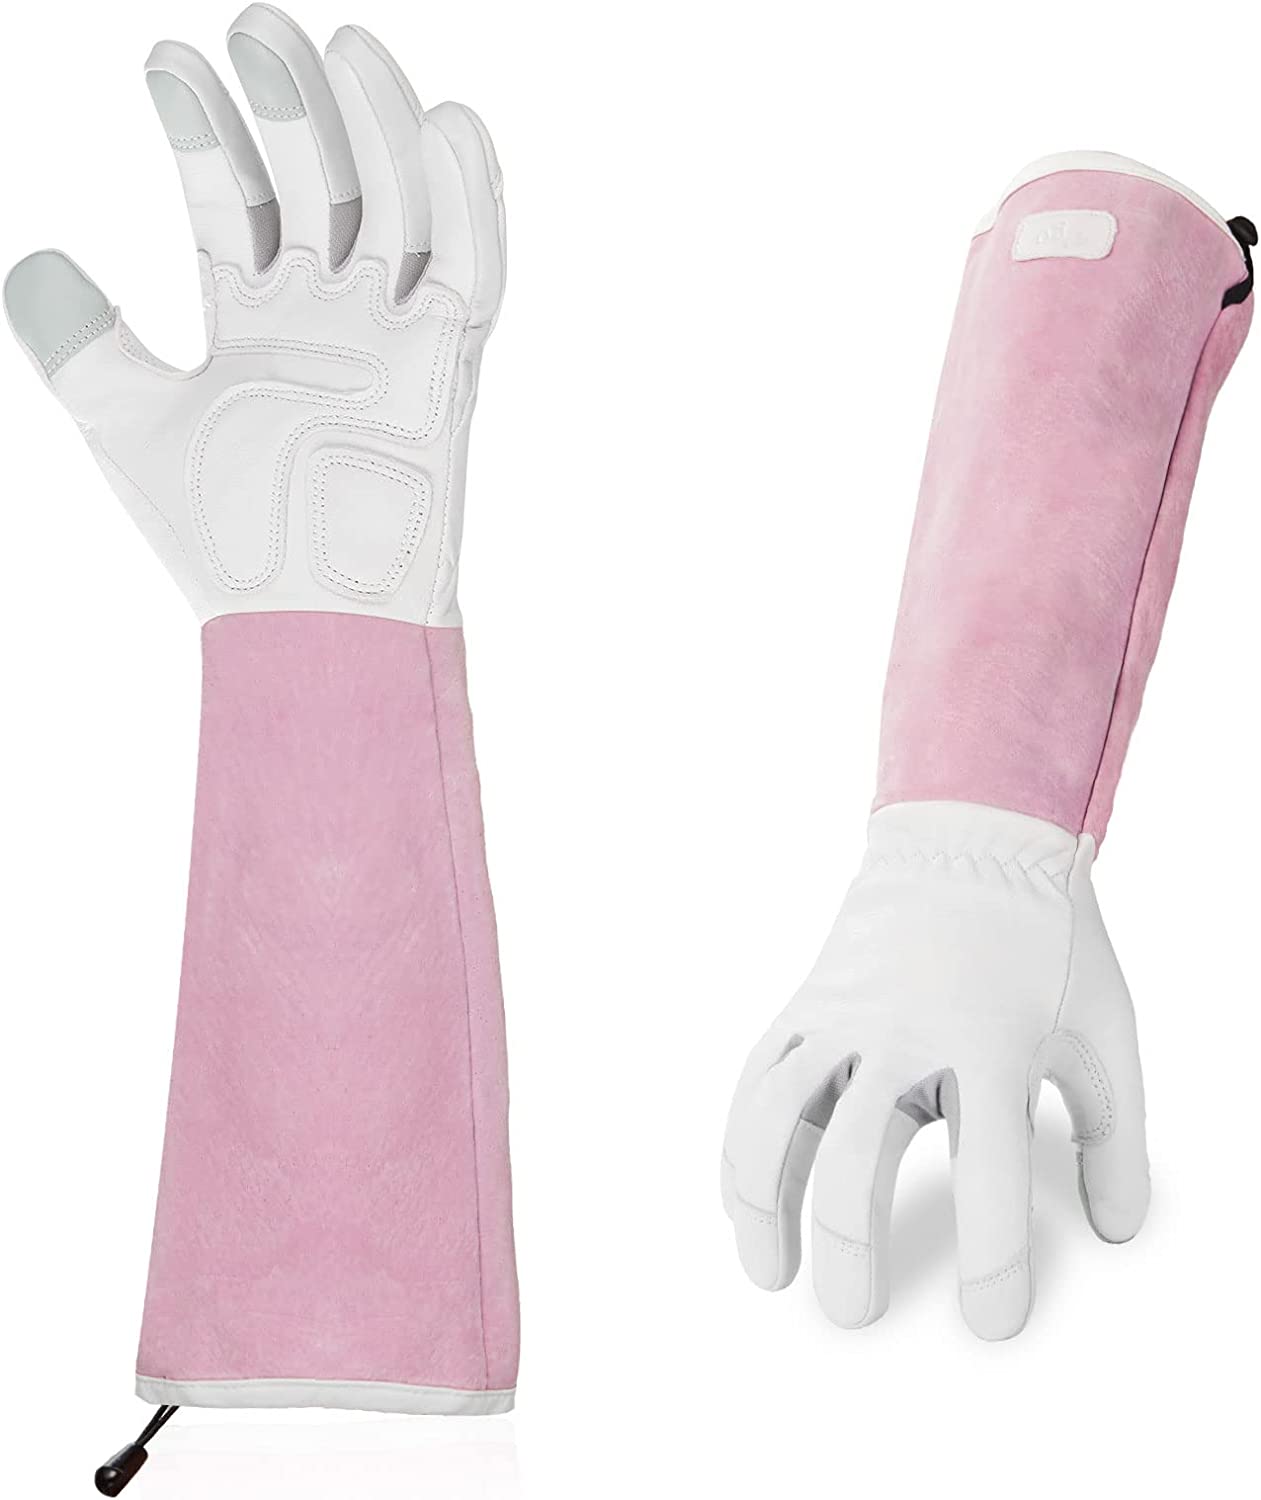 Vgo | 1-Pair Premium Genuine Goat Leather Extra-Long Cuff Thornproof Gardening Gloves (Size S, Pink White, GA1013)